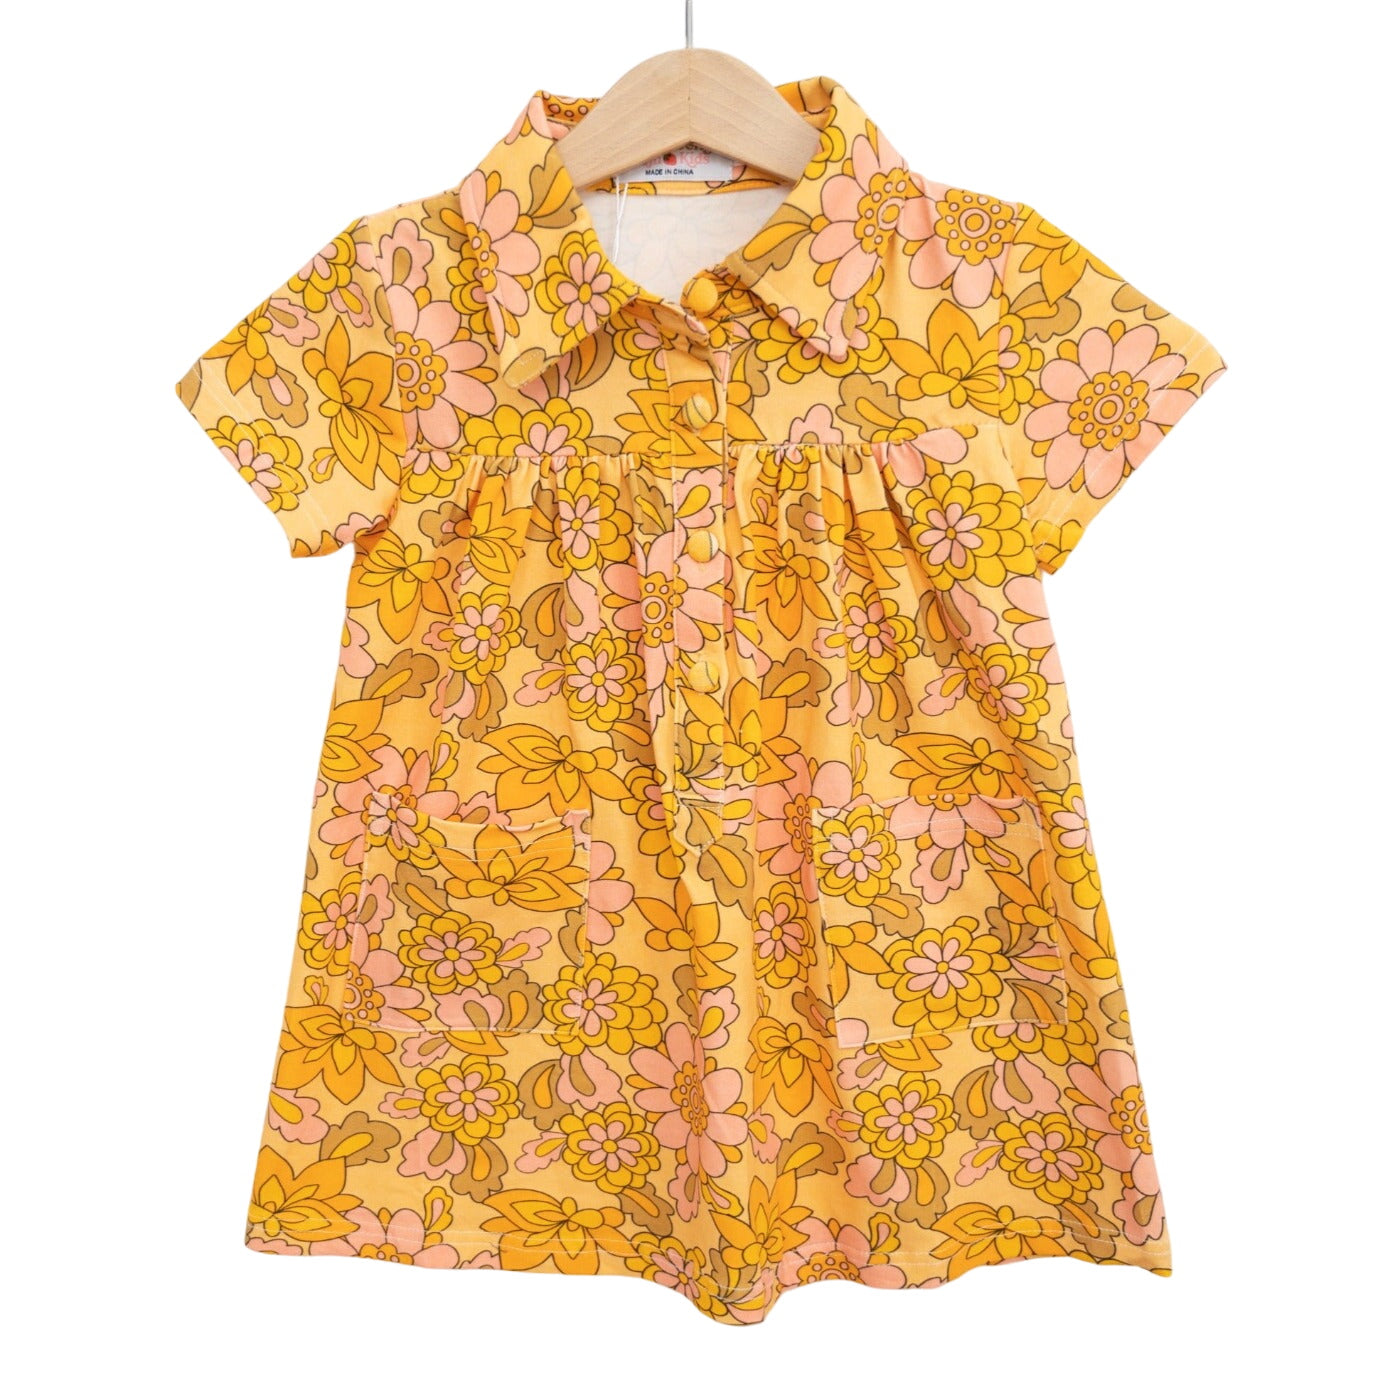 Seventies Yellow Retro Floral Collar Dress For Toddlers And Girls